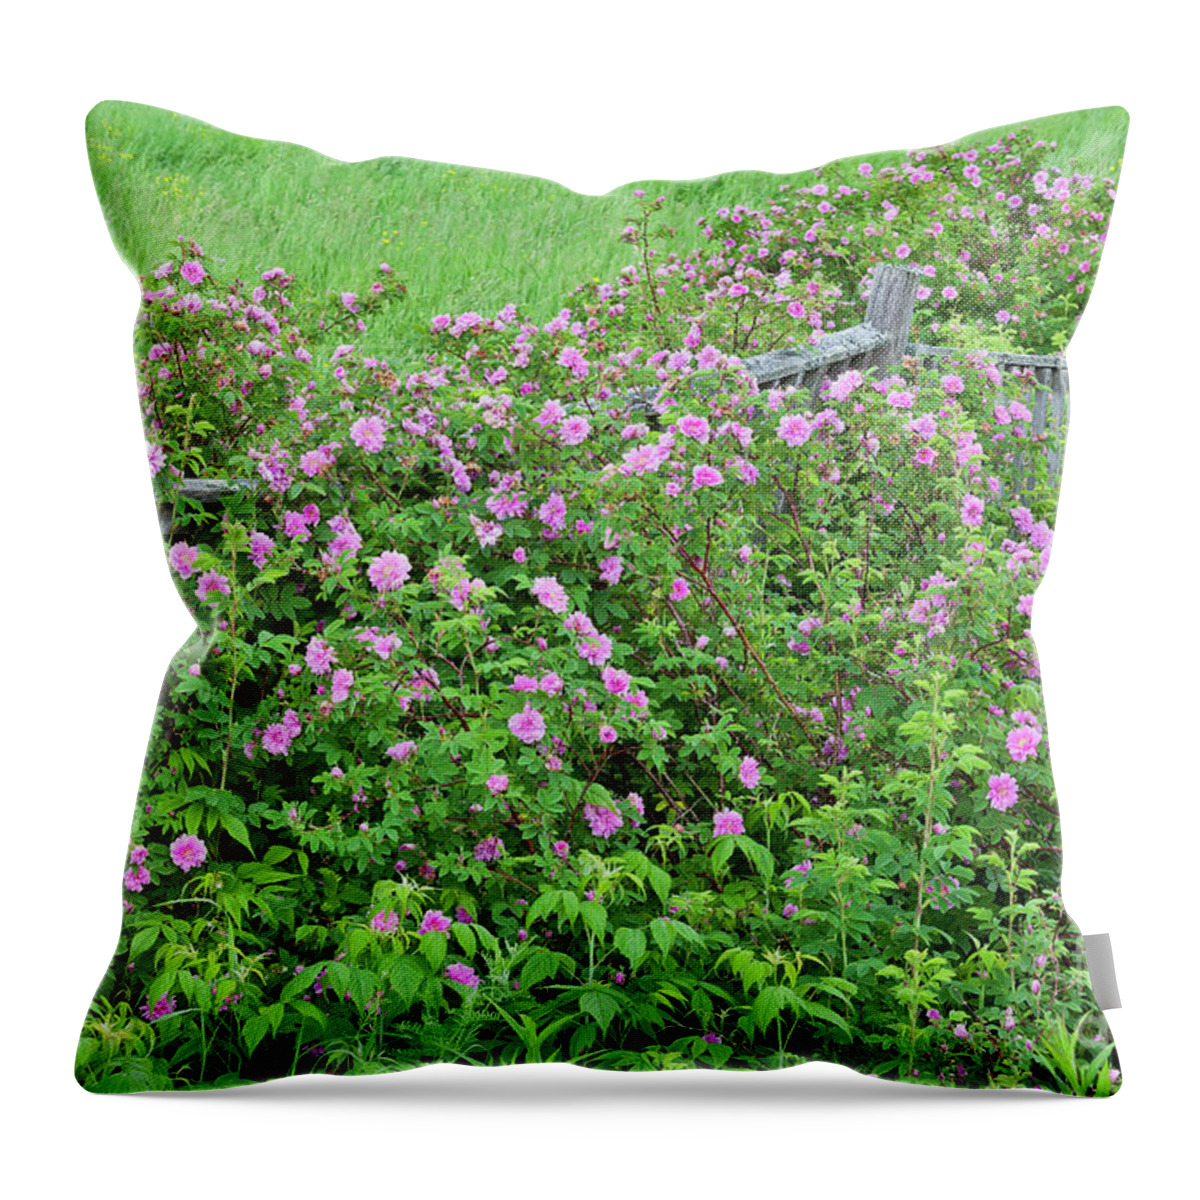 Rose Throw Pillow featuring the photograph Wild Roses by Alan L Graham